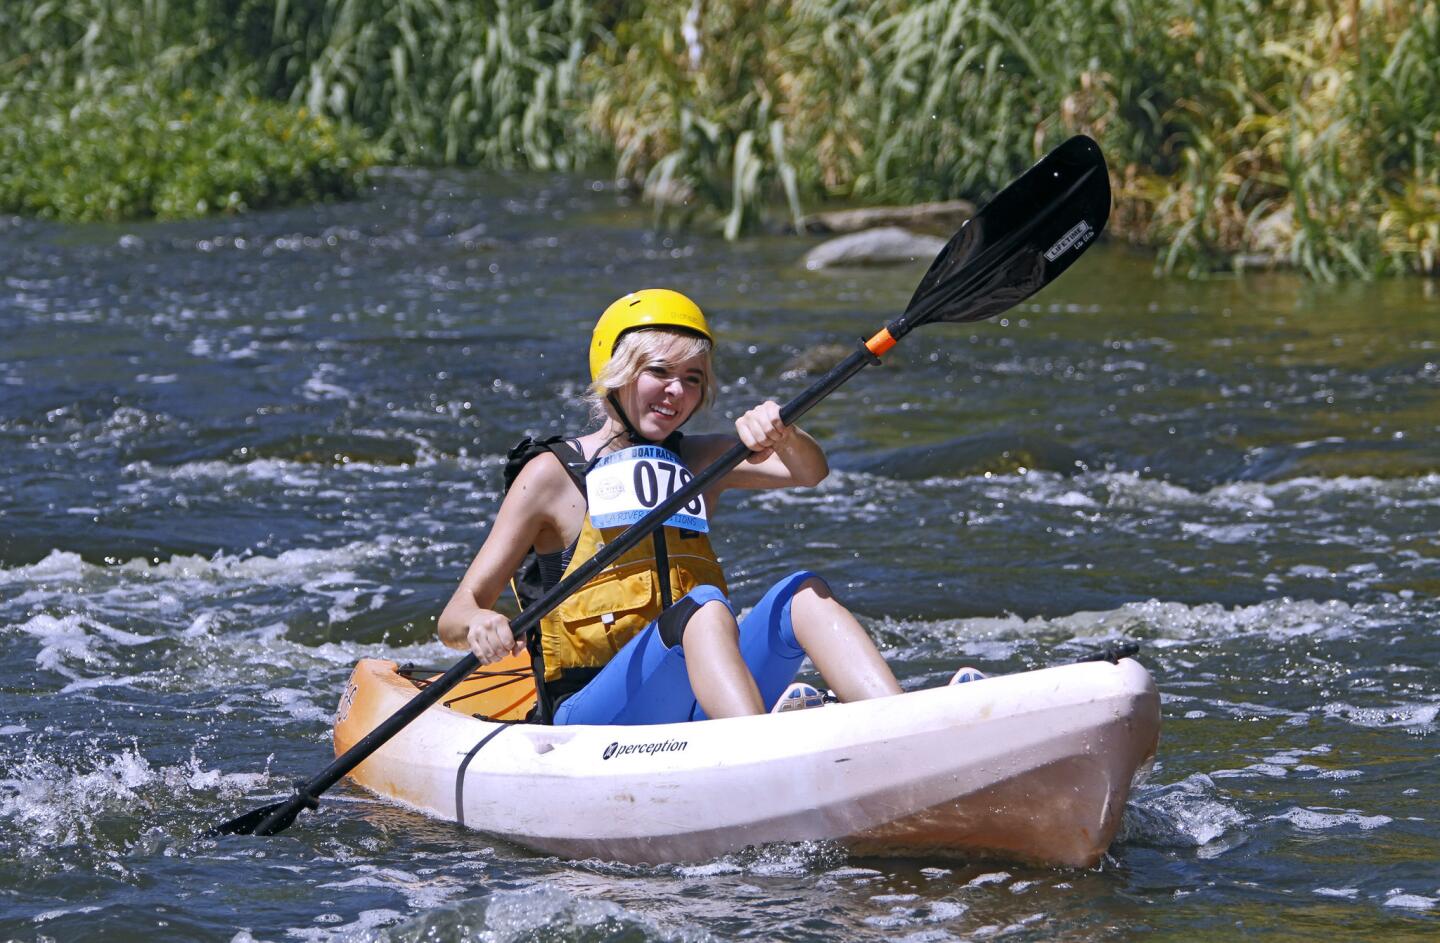 Shawnee Badger, 21 of Valencia, heads down river in the L.A. River Expeditions first annual L.A. River boat race at Rattlesnake Park just south of Fletcher Drive in L.A. on Saturday, Aug. 30, 2014.